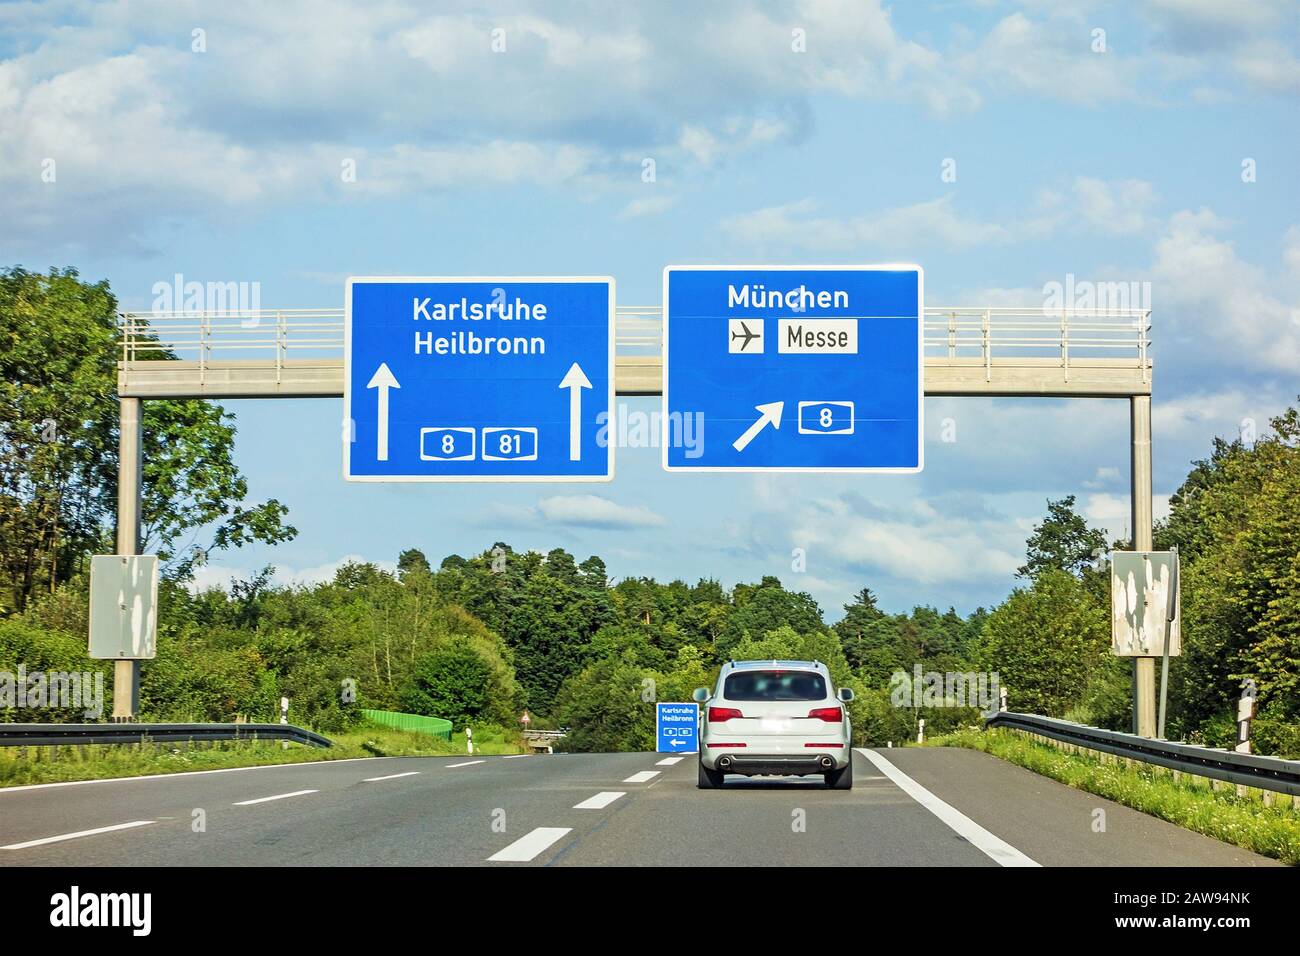 motorway road sign on (Autobahn A 81 / A 8) directions Karlsruhe / Heilbronn - exit A 8 to Munich / Airport / Messe Stock Photo